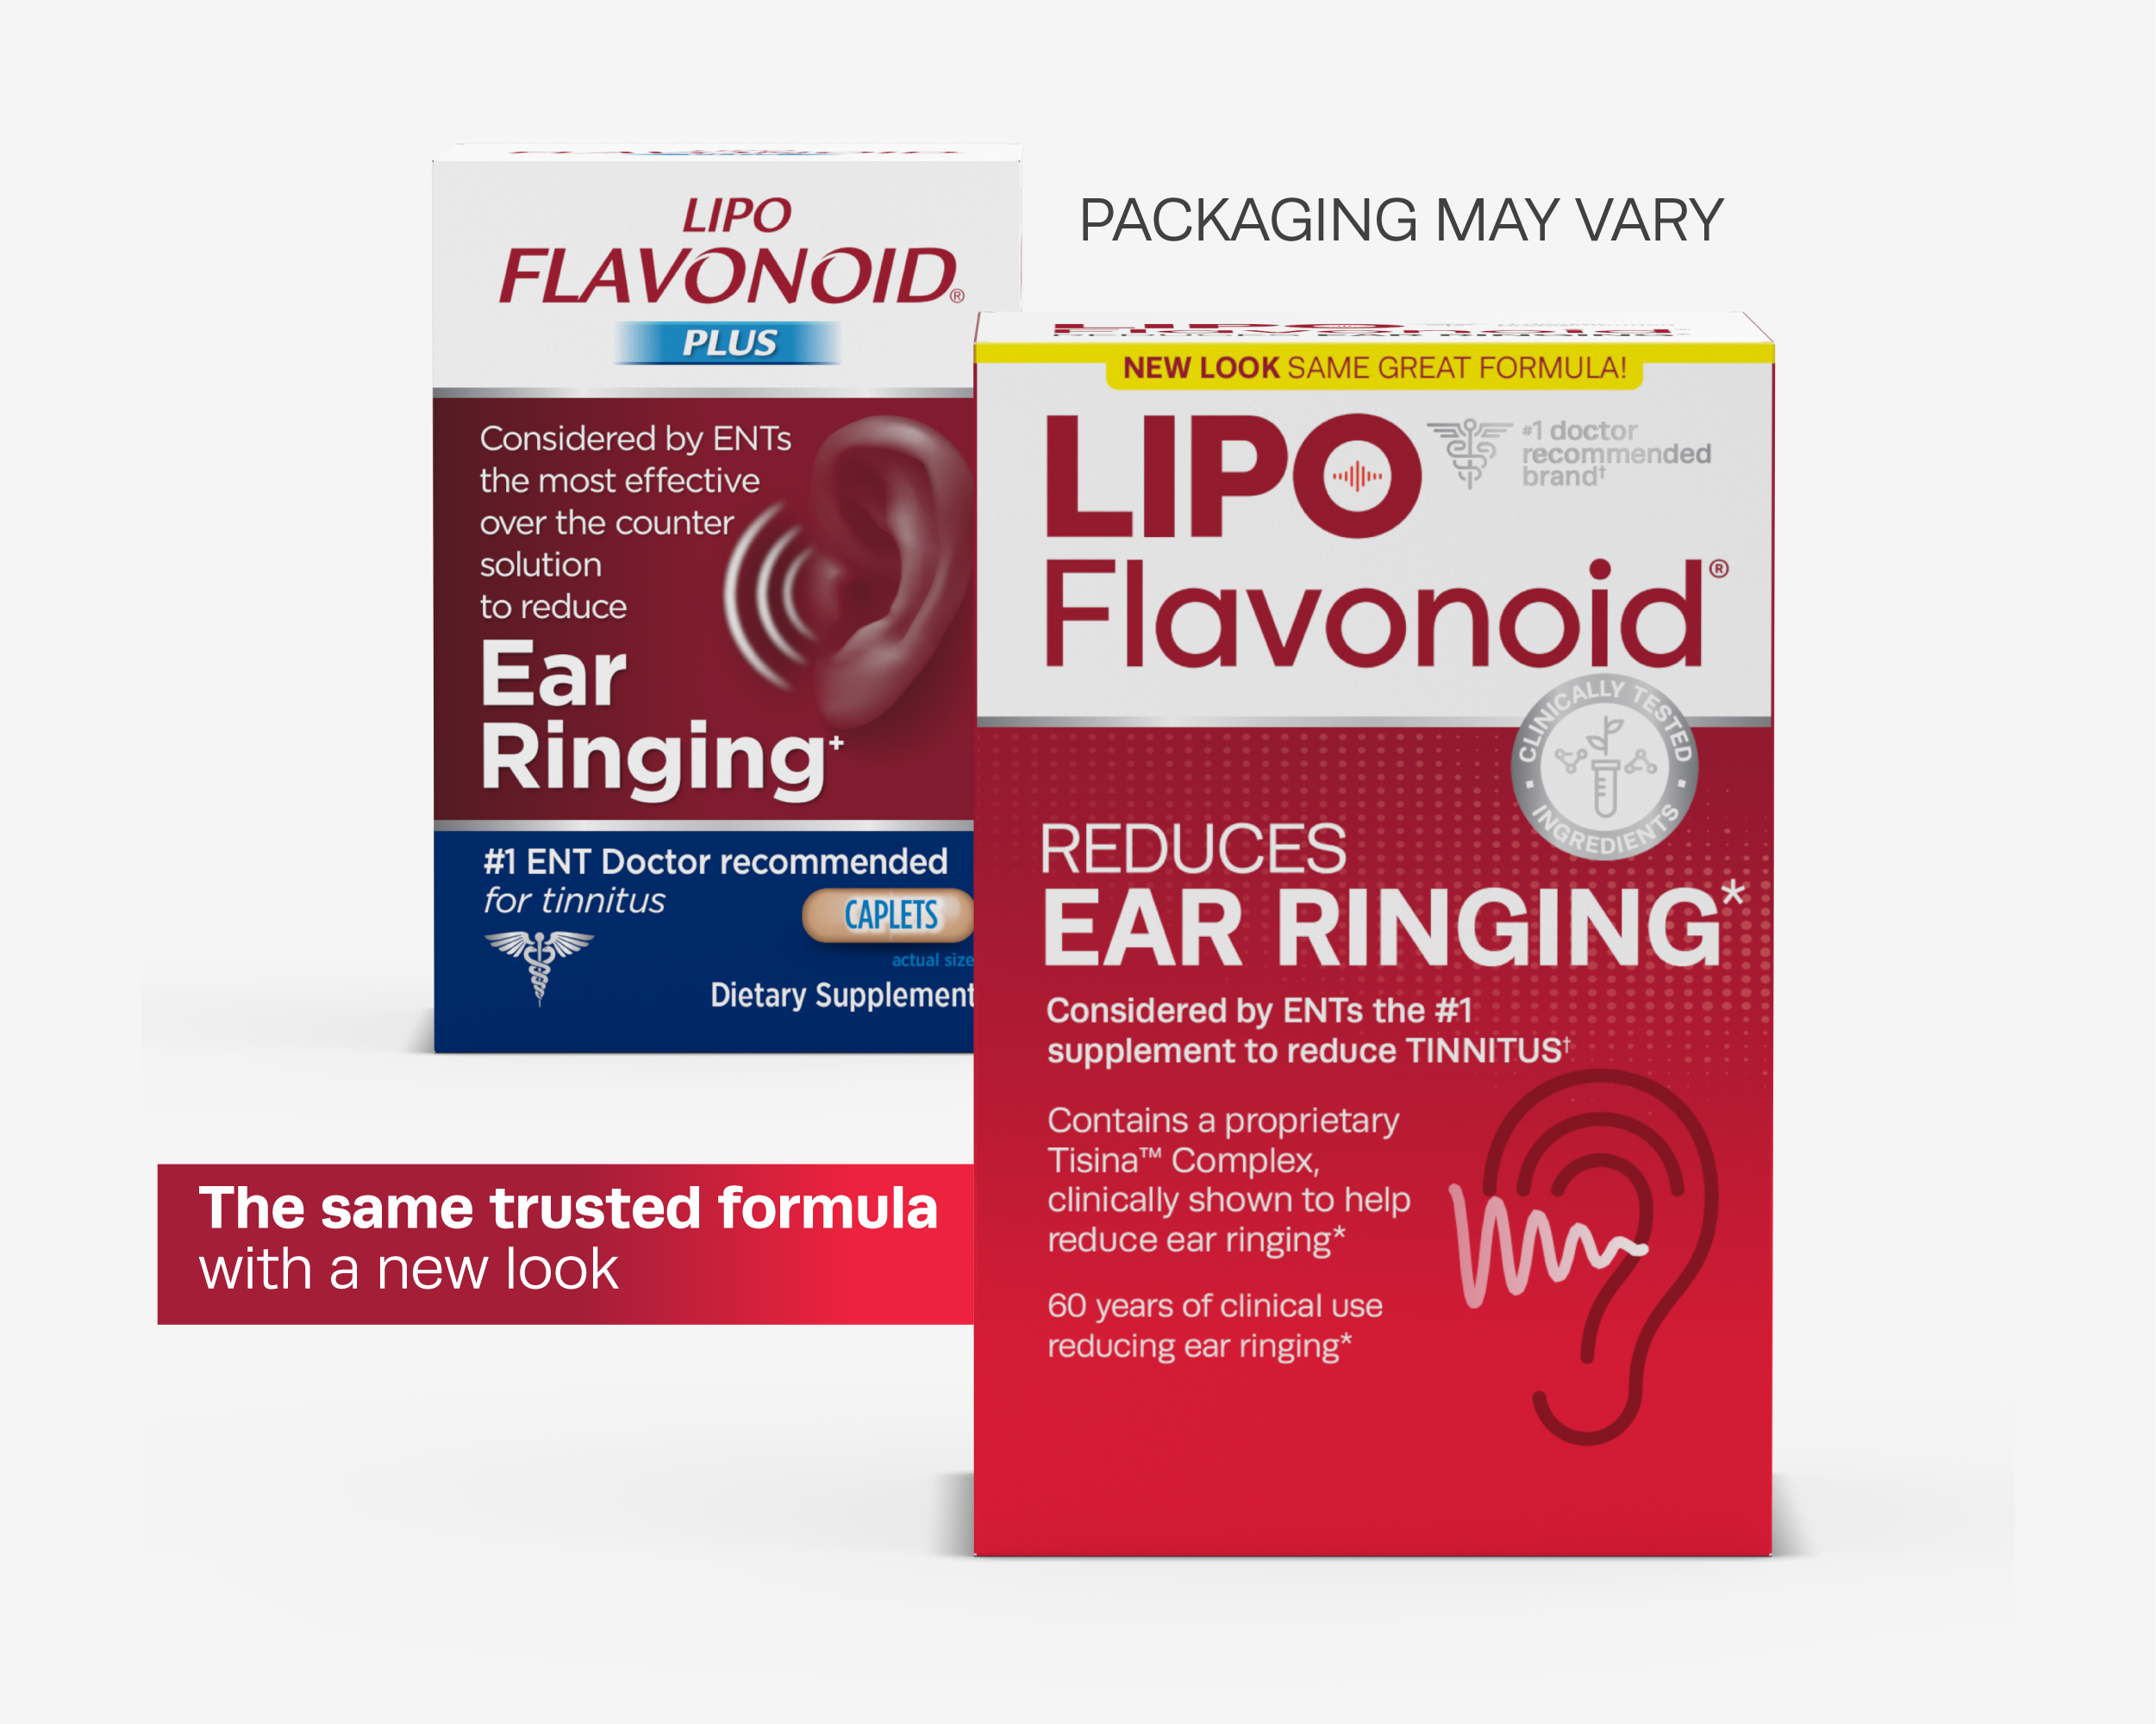 Lipo-Flavonoid Plus, Tinnitus Relief for Ear Ringing, Health Supplement, 500 Caplets, Value Size (Packaging May Vary) - image 1 of 12